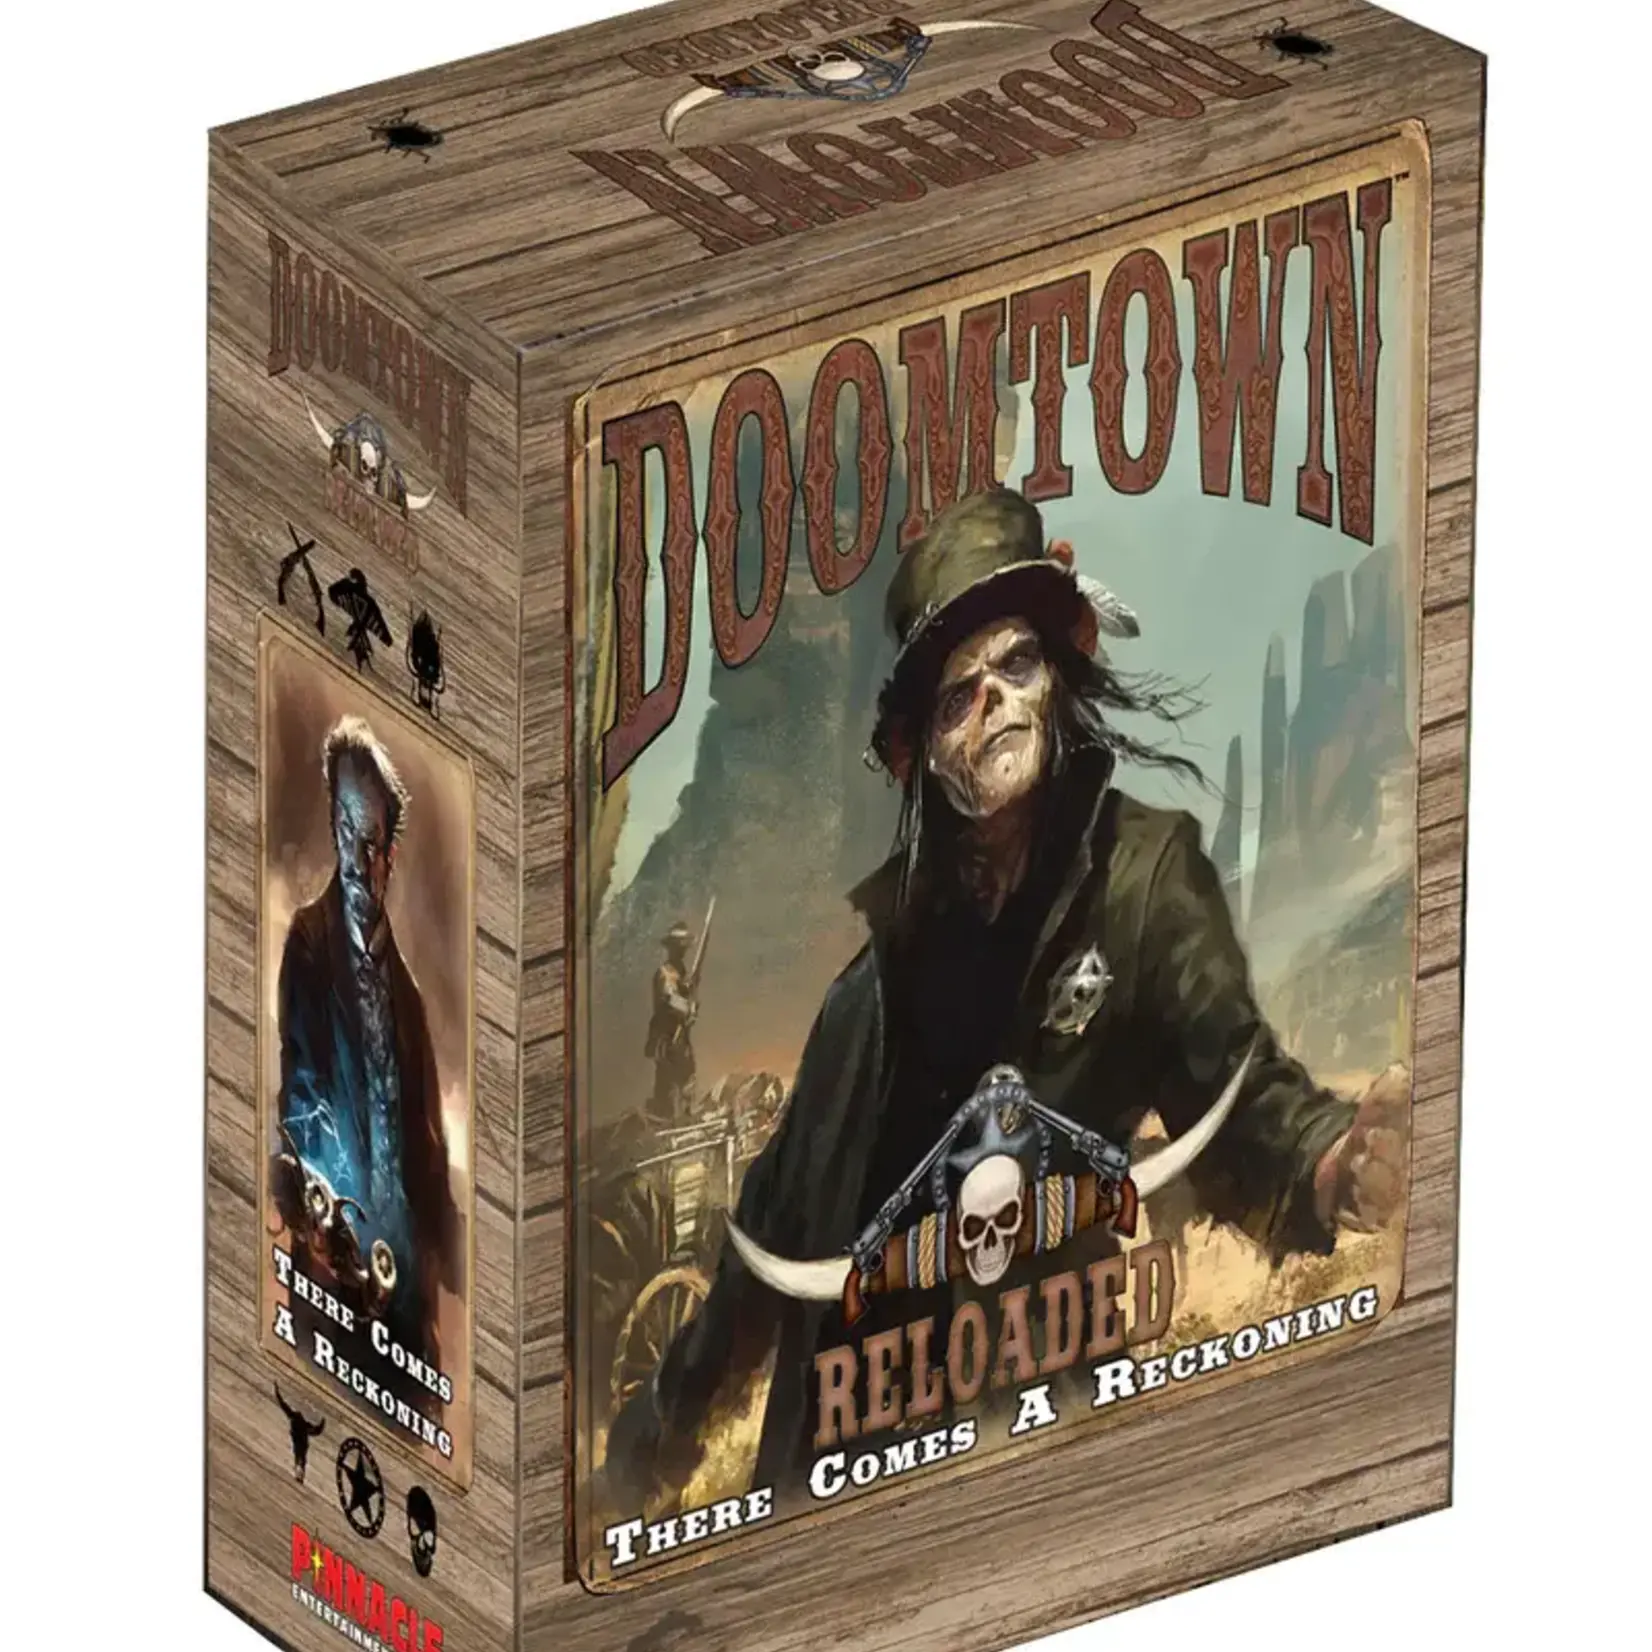 Pinebox Entertainment Doomtown Reloaded: Trunk w/ There Comes a Reckoning Expansion